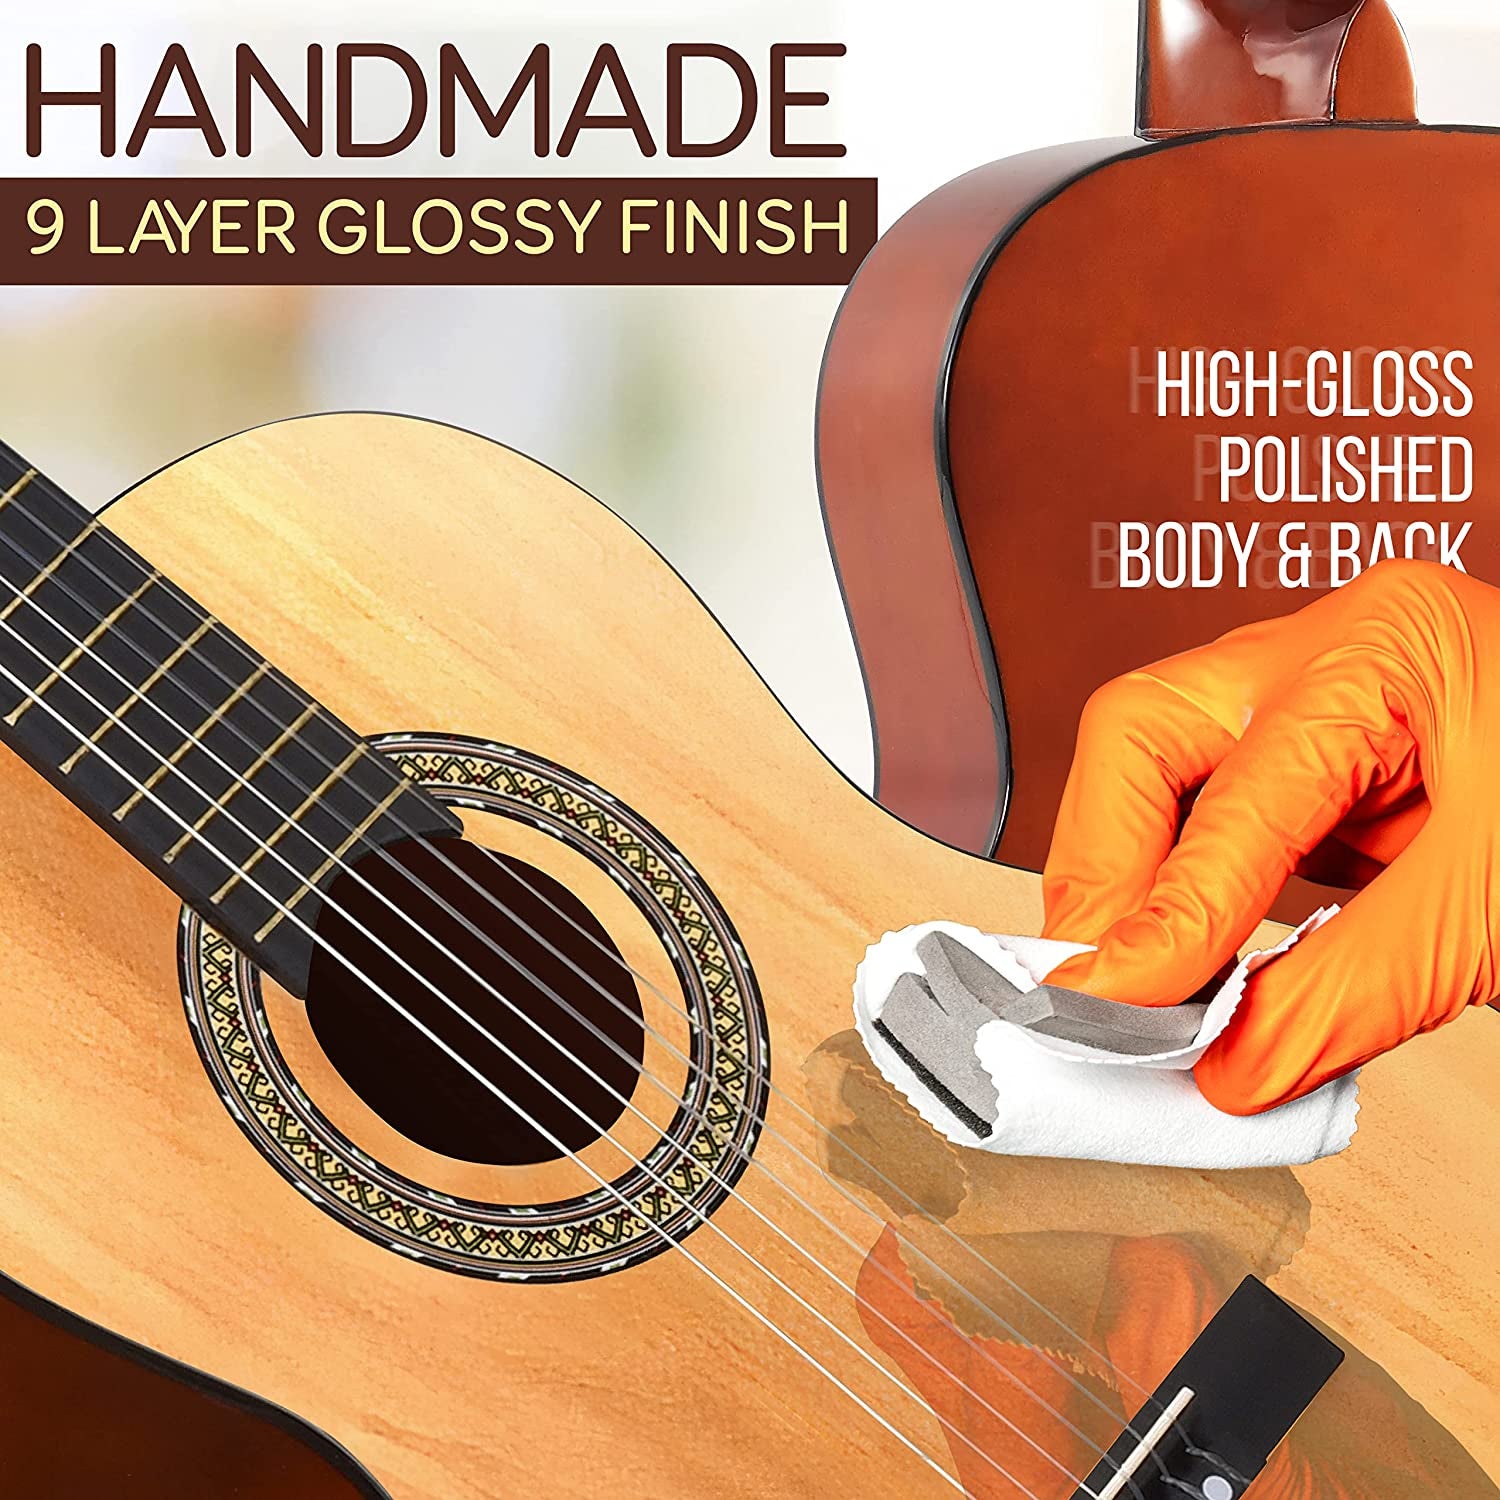 Junior Size 3/4 Acoustic Guitar Kit, Ideal for Kids and Adults, 36" Natural Gloss Finish